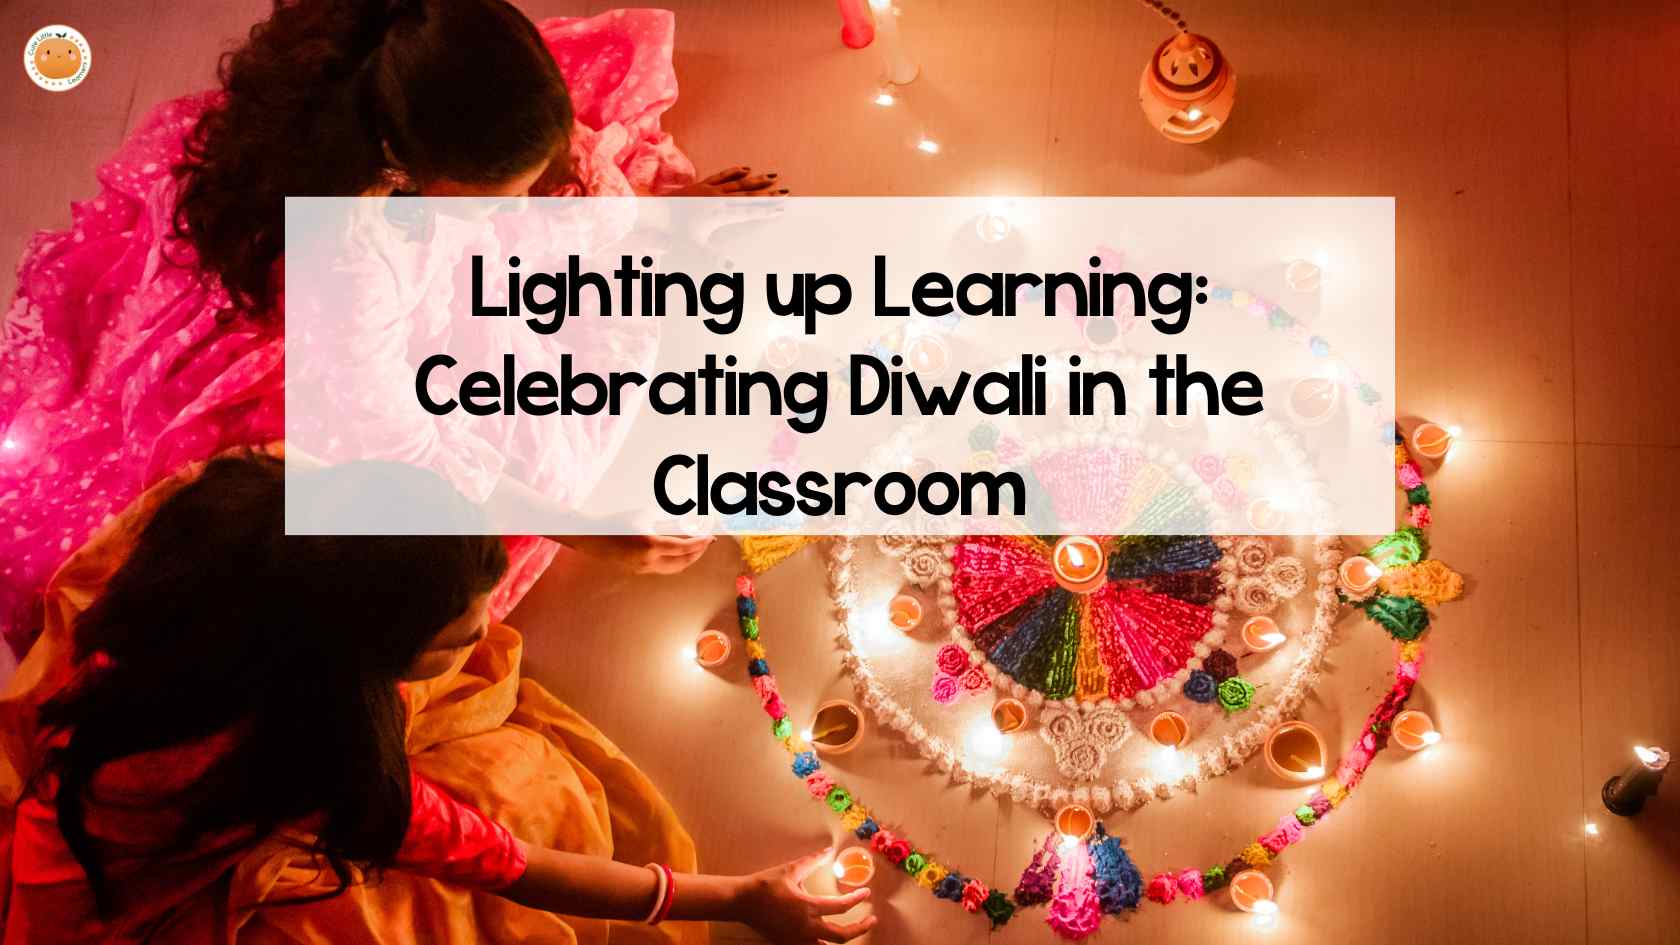 Lighting Up Learning: Celebrating Diwali in the Classroom